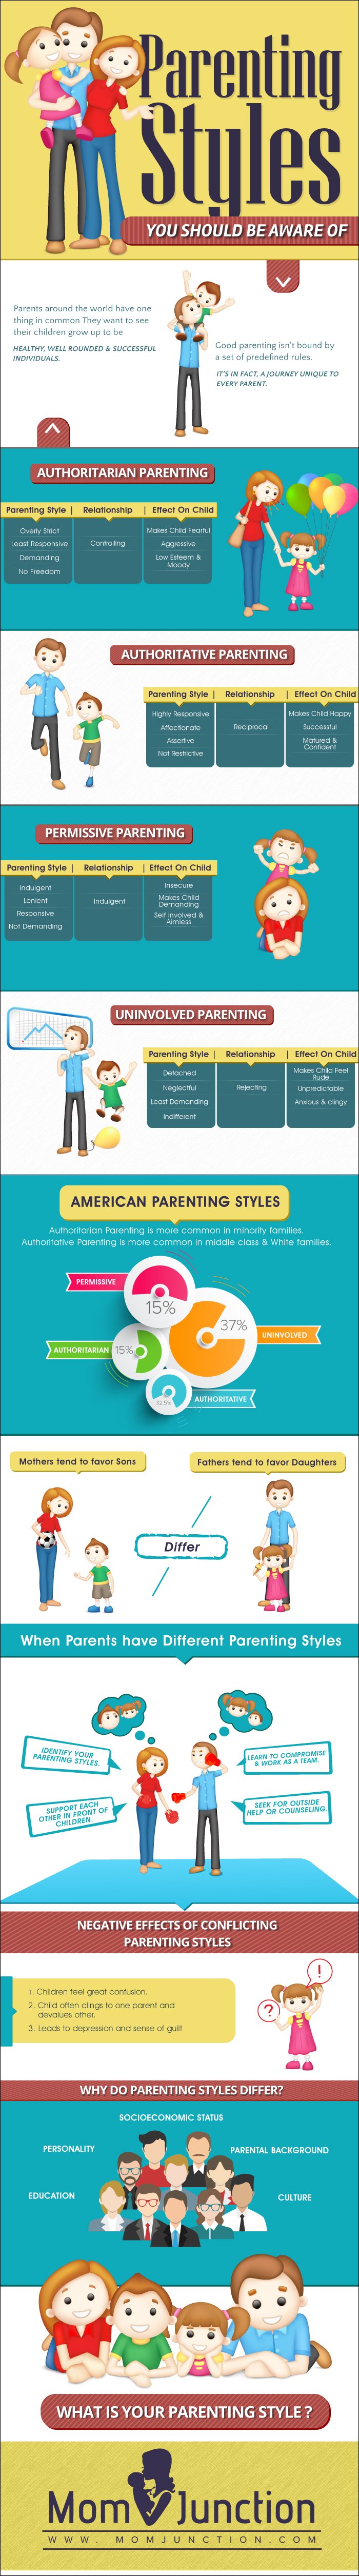 Parenting-Styles-You-Should-Be-Aware-Of